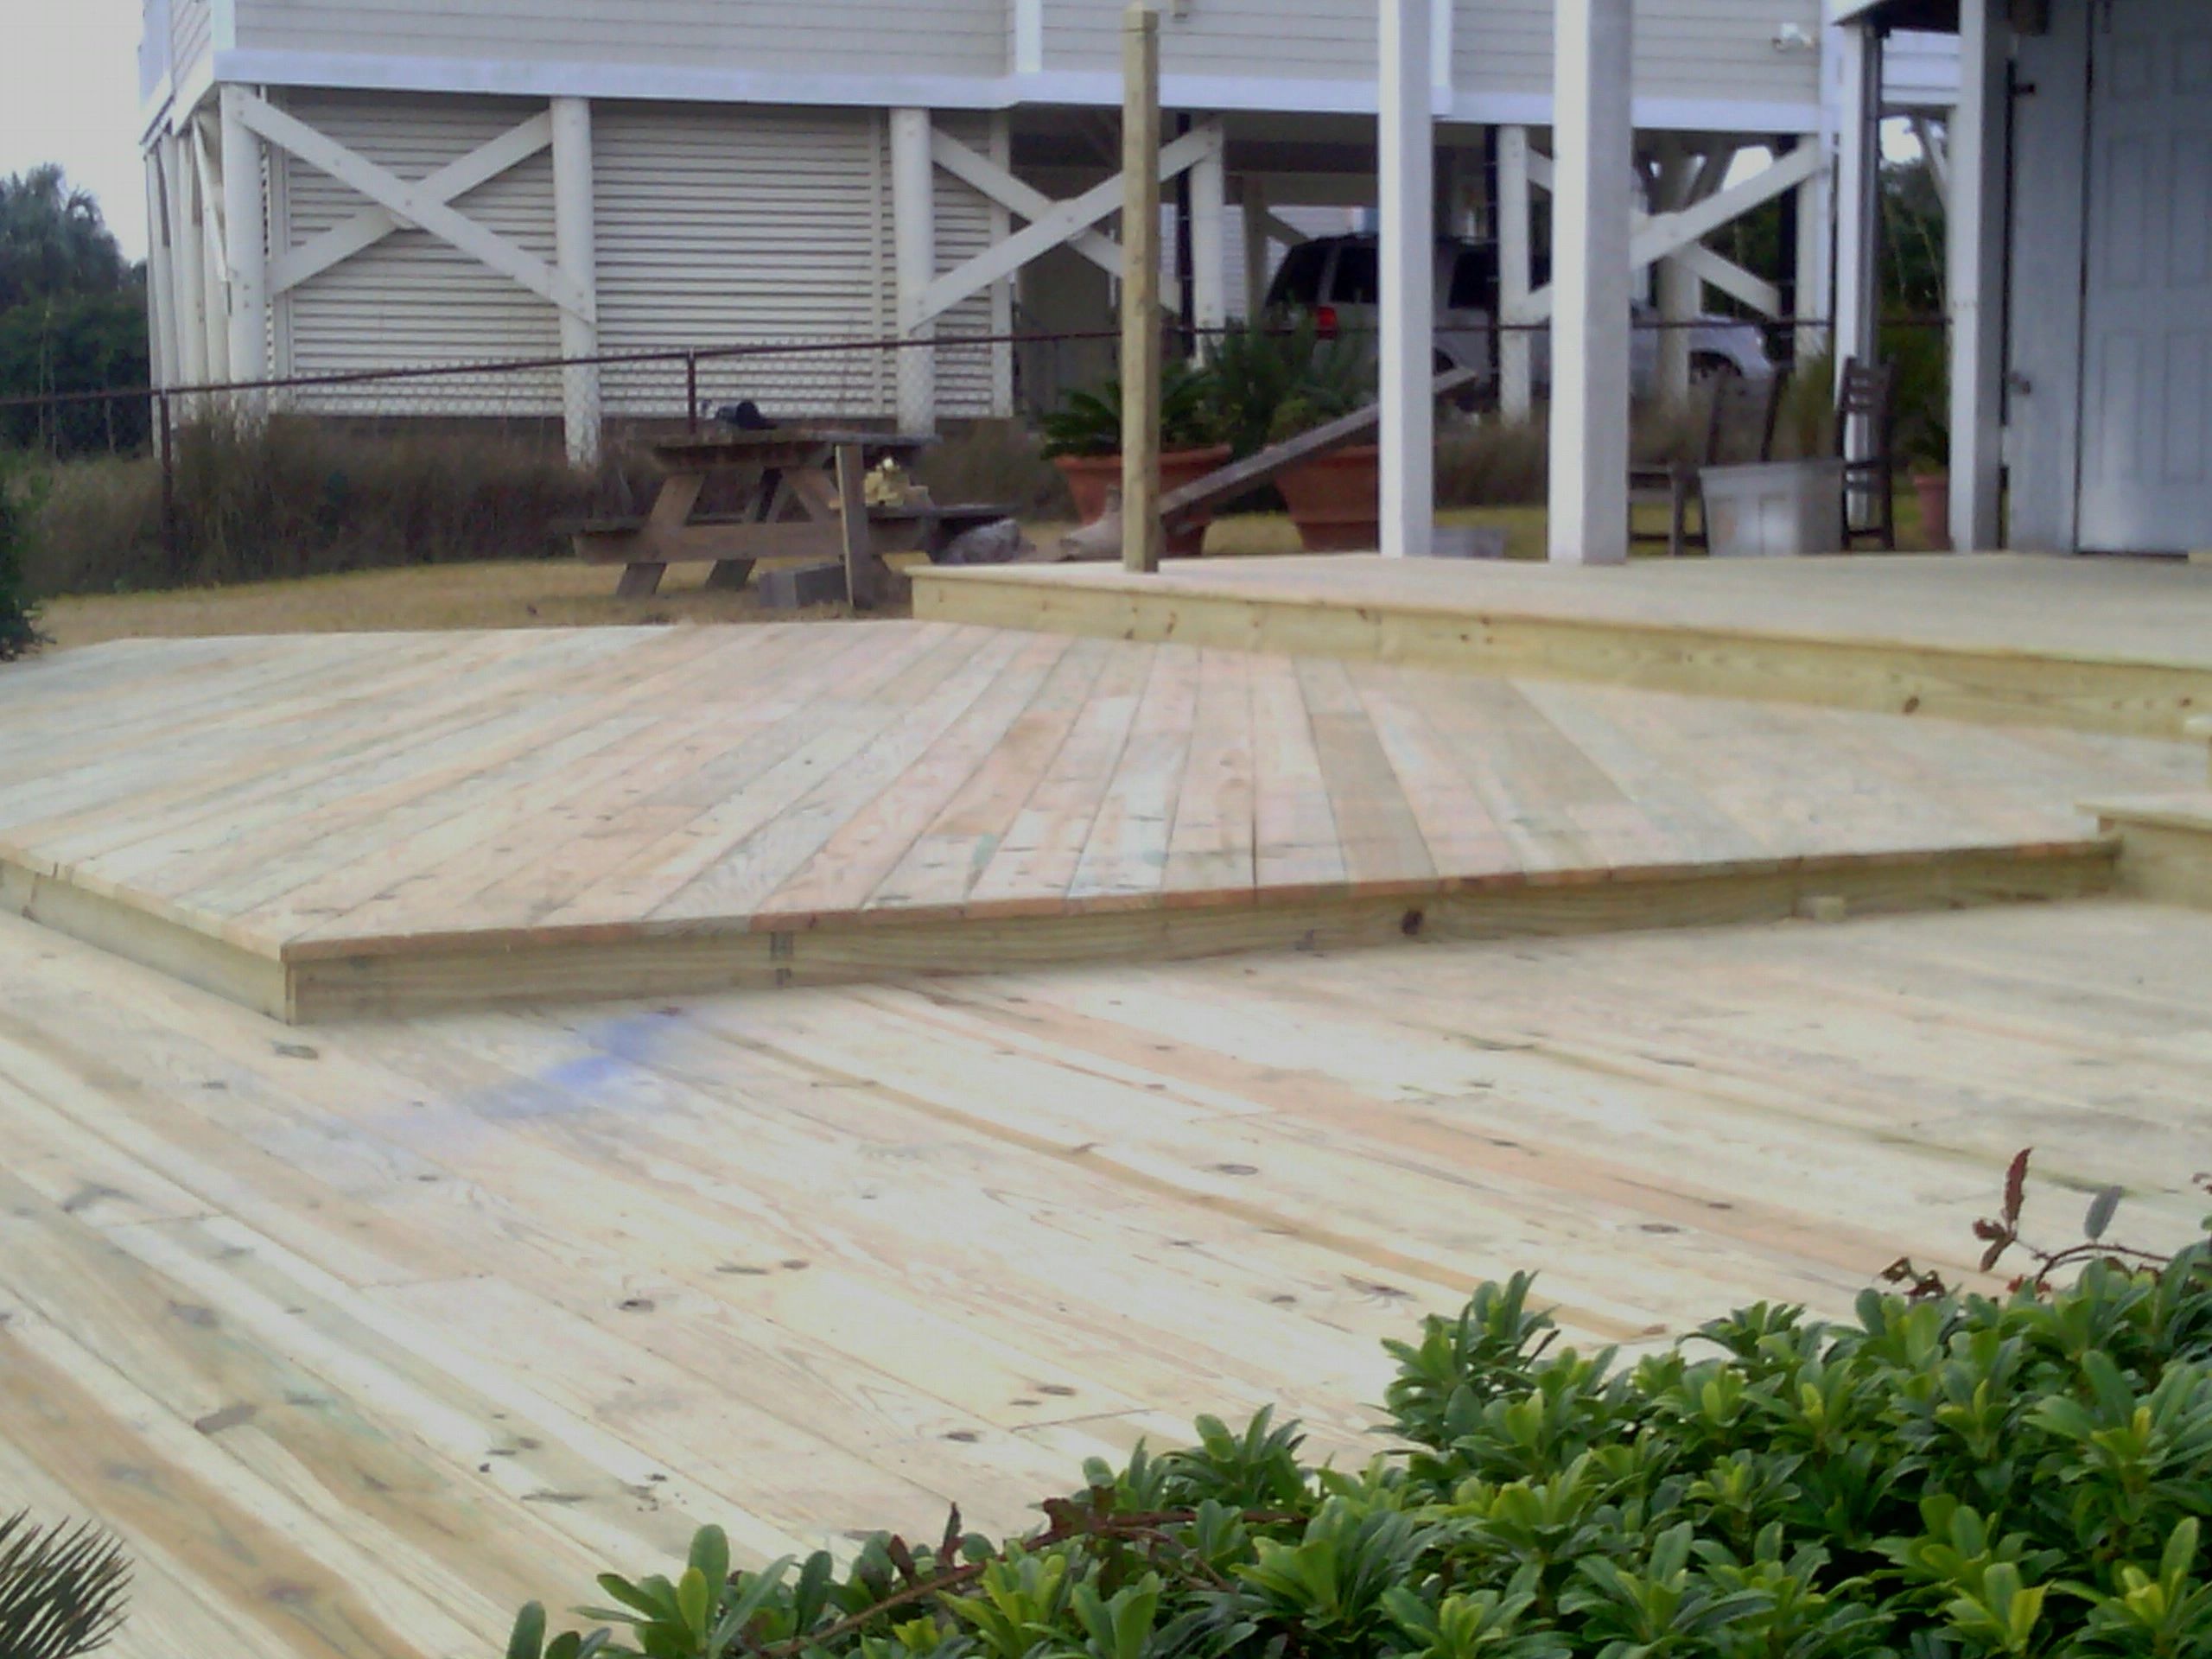 New 3 level deck on the water in Murrells Inlet